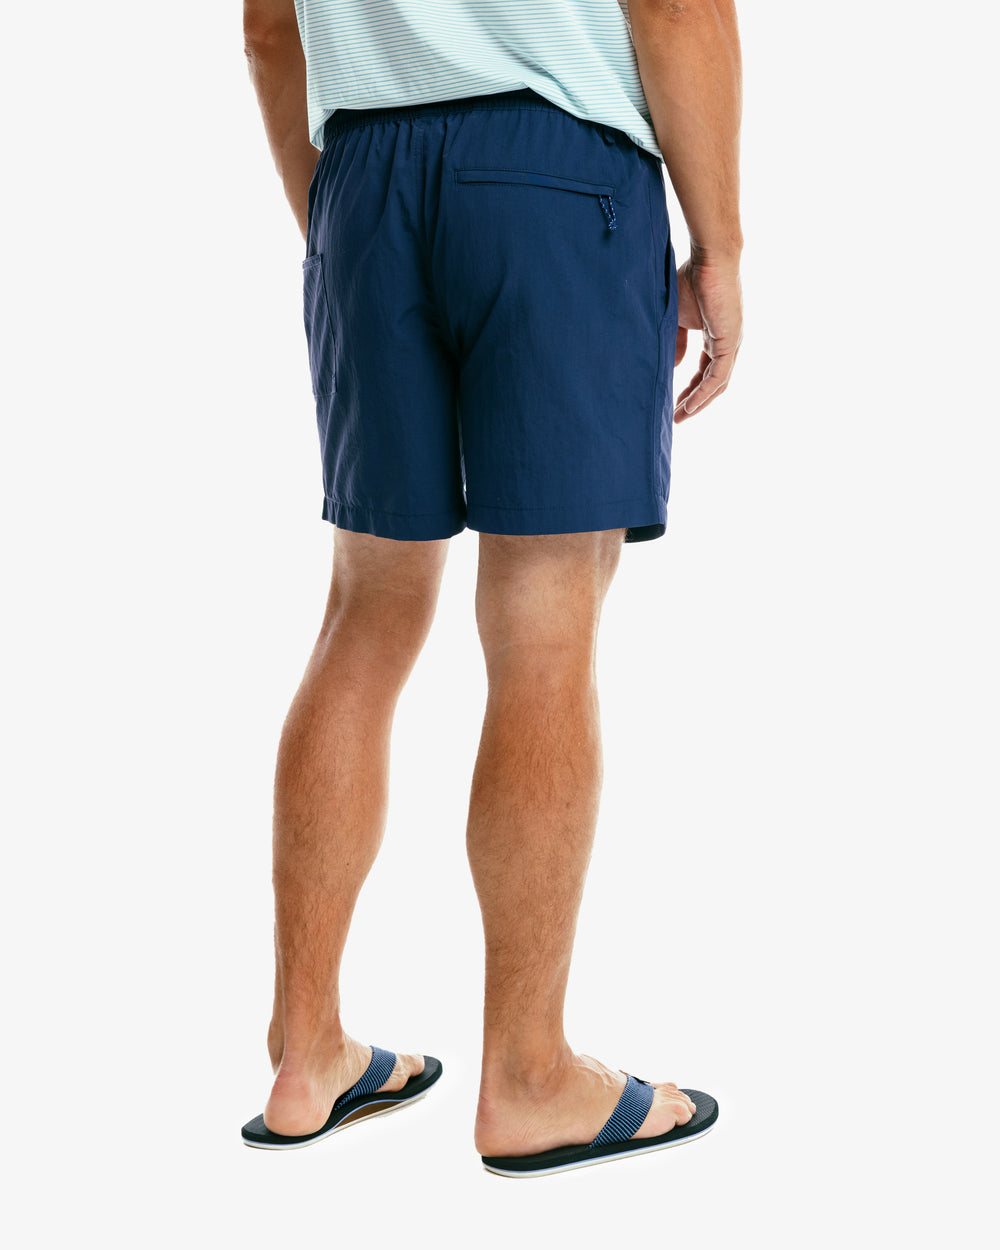 The model back view of the Men's Shoreline 6 Inch Short by Southern Tide  - True Navy